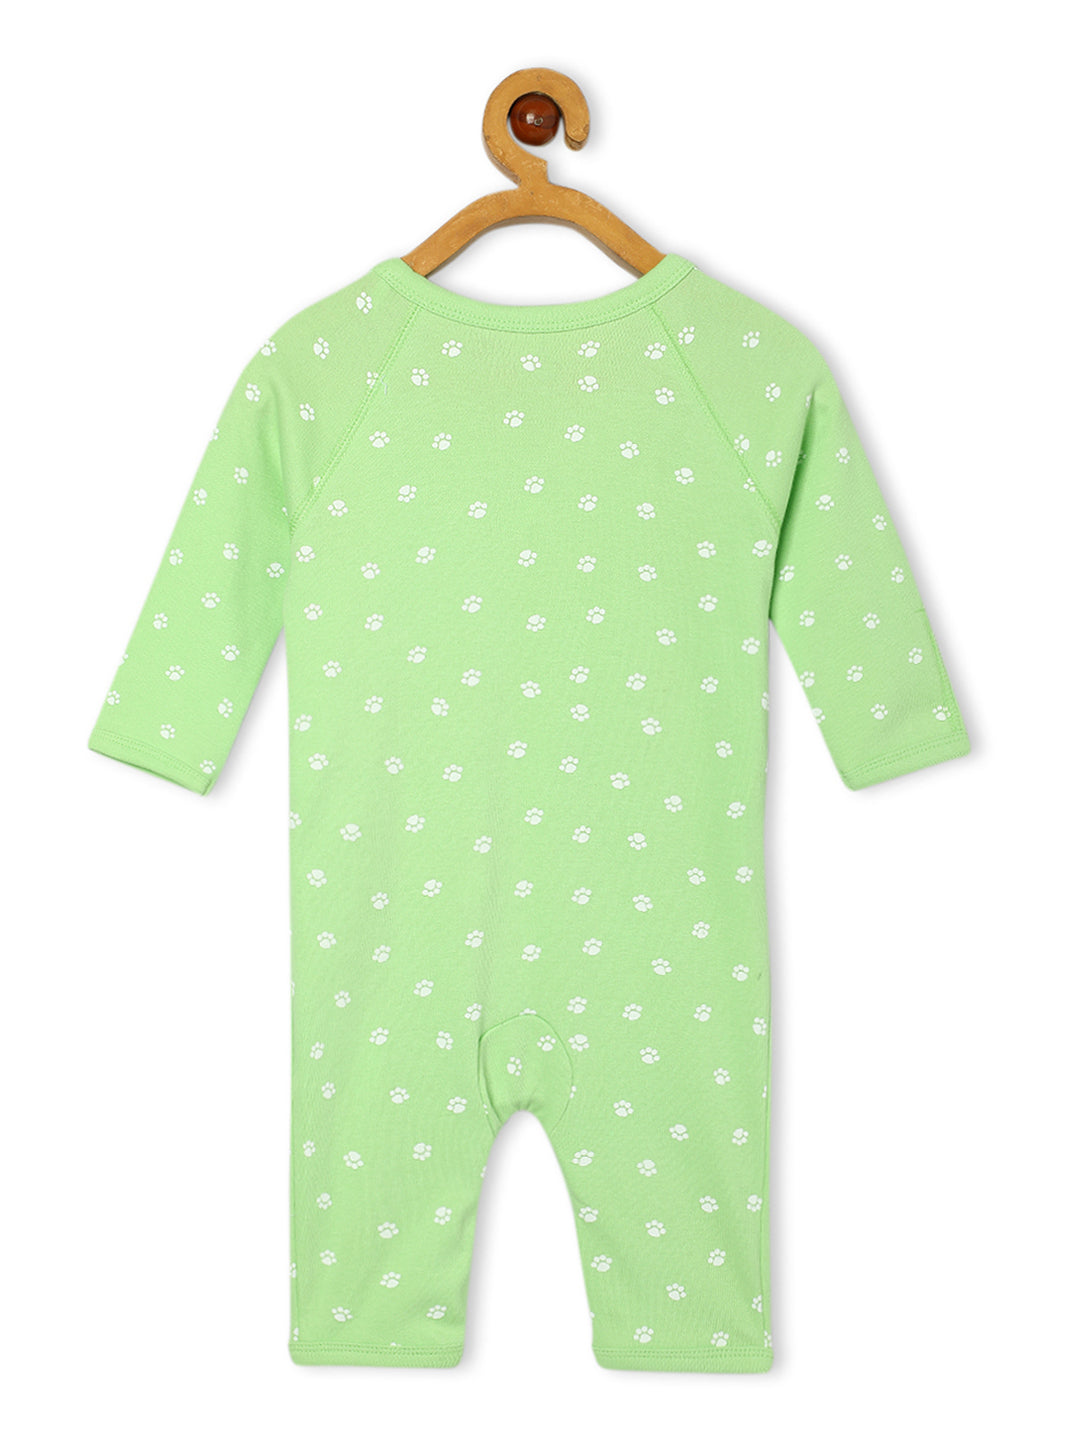 Jabla Infant Romper Combo Of 3: Feline Fighters-Staying Pawsitive-Get On My Level